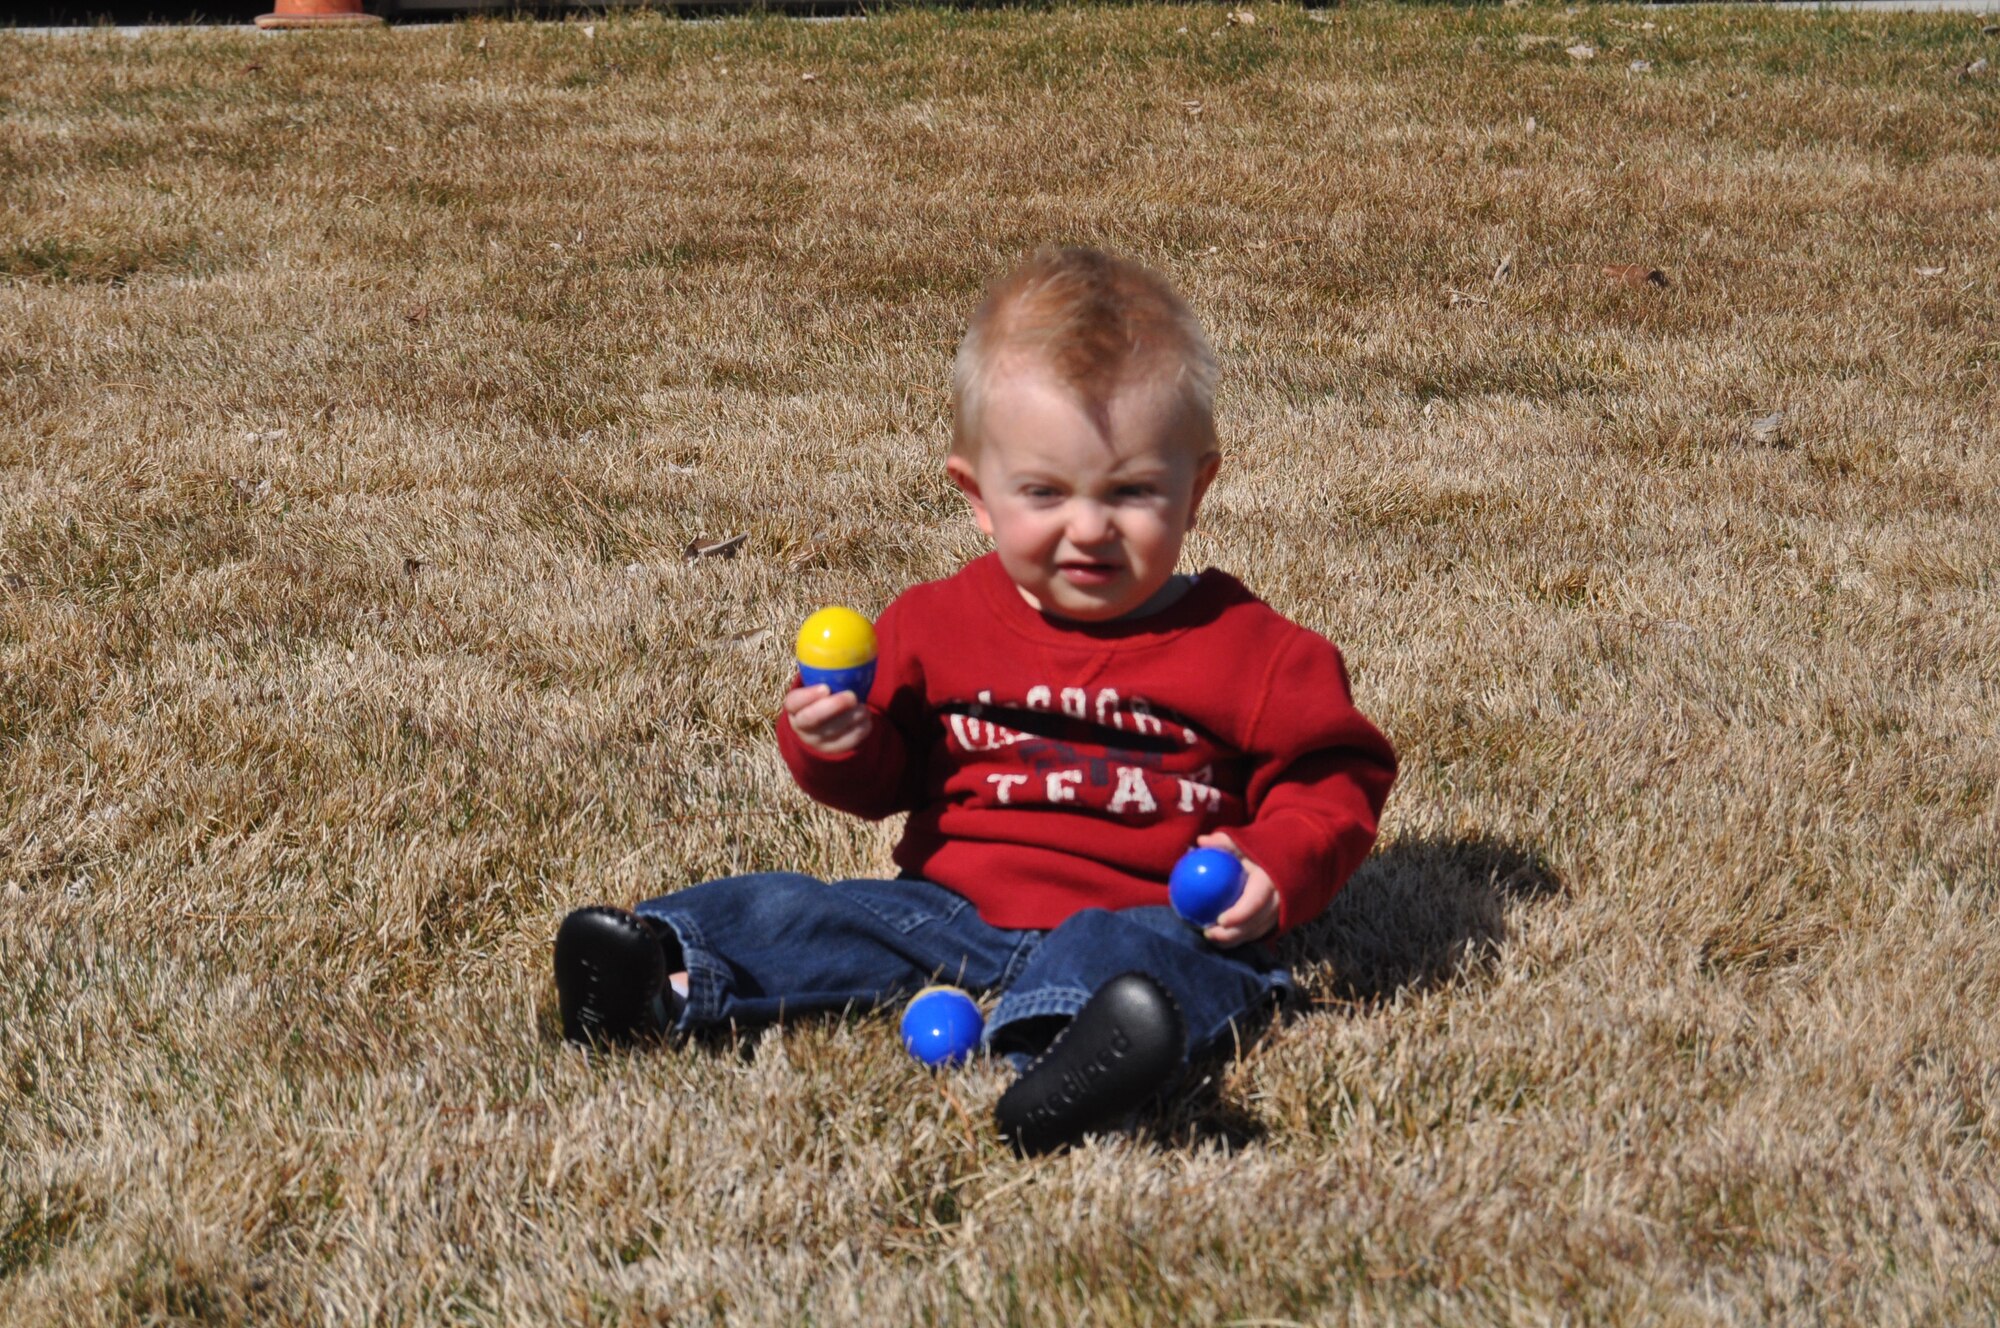 Oliver Bird, son of Master Sgt. Nathan Bird, 151st Logistics Readiness Squadron, finds an Easter egg during the Utah Air National Guard's annual Children's Easter Egg Hunt March 27. Oliver was one of hundreds of children who participated in the festivities on base, which included a magic show, egg hunt and hot dog lunch. U.S. Air Force photo by Lindsey Cheetham.